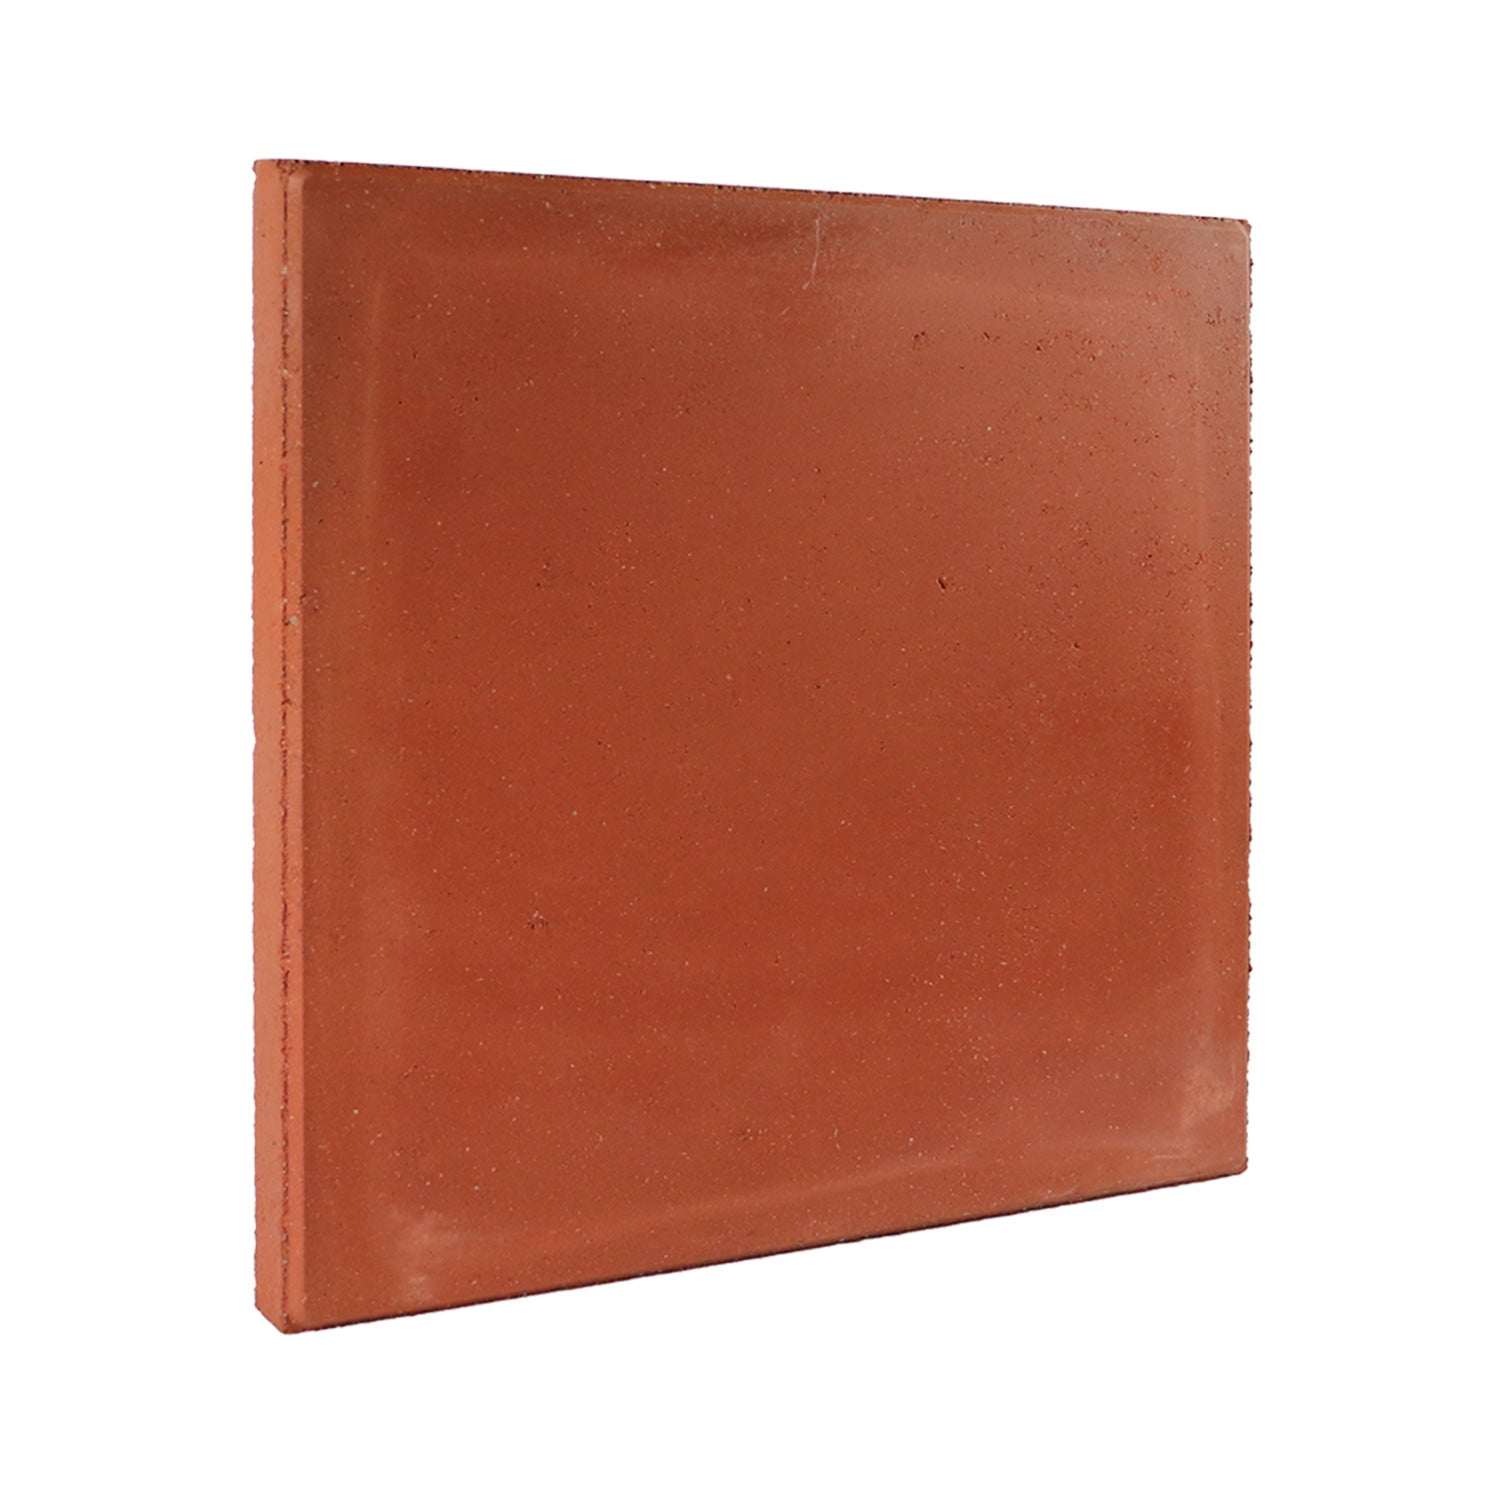 Village Stone Red Smooth 450mm x 450mm